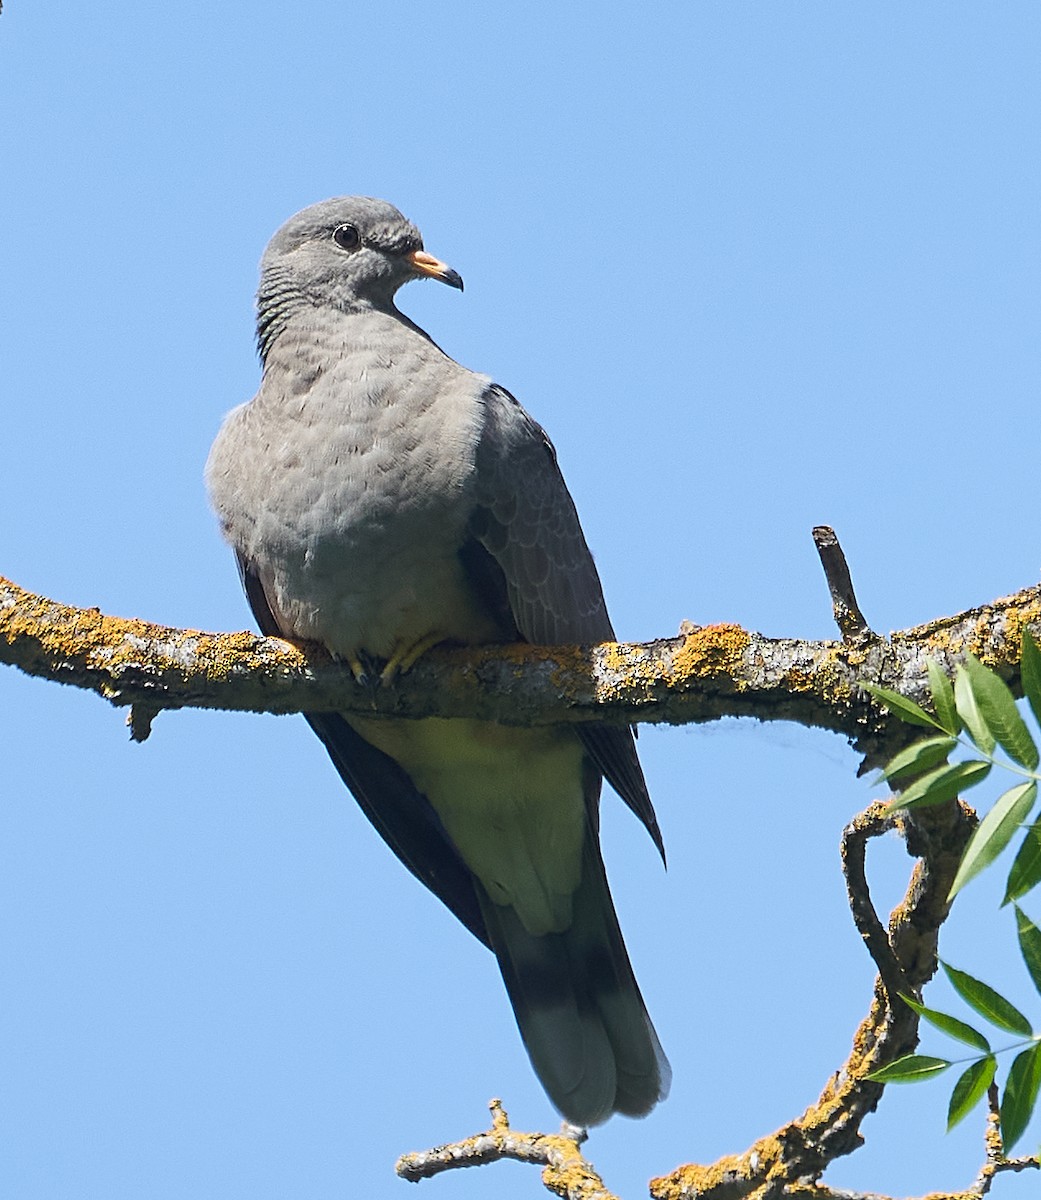 Band-tailed Pigeon - Brooke Miller